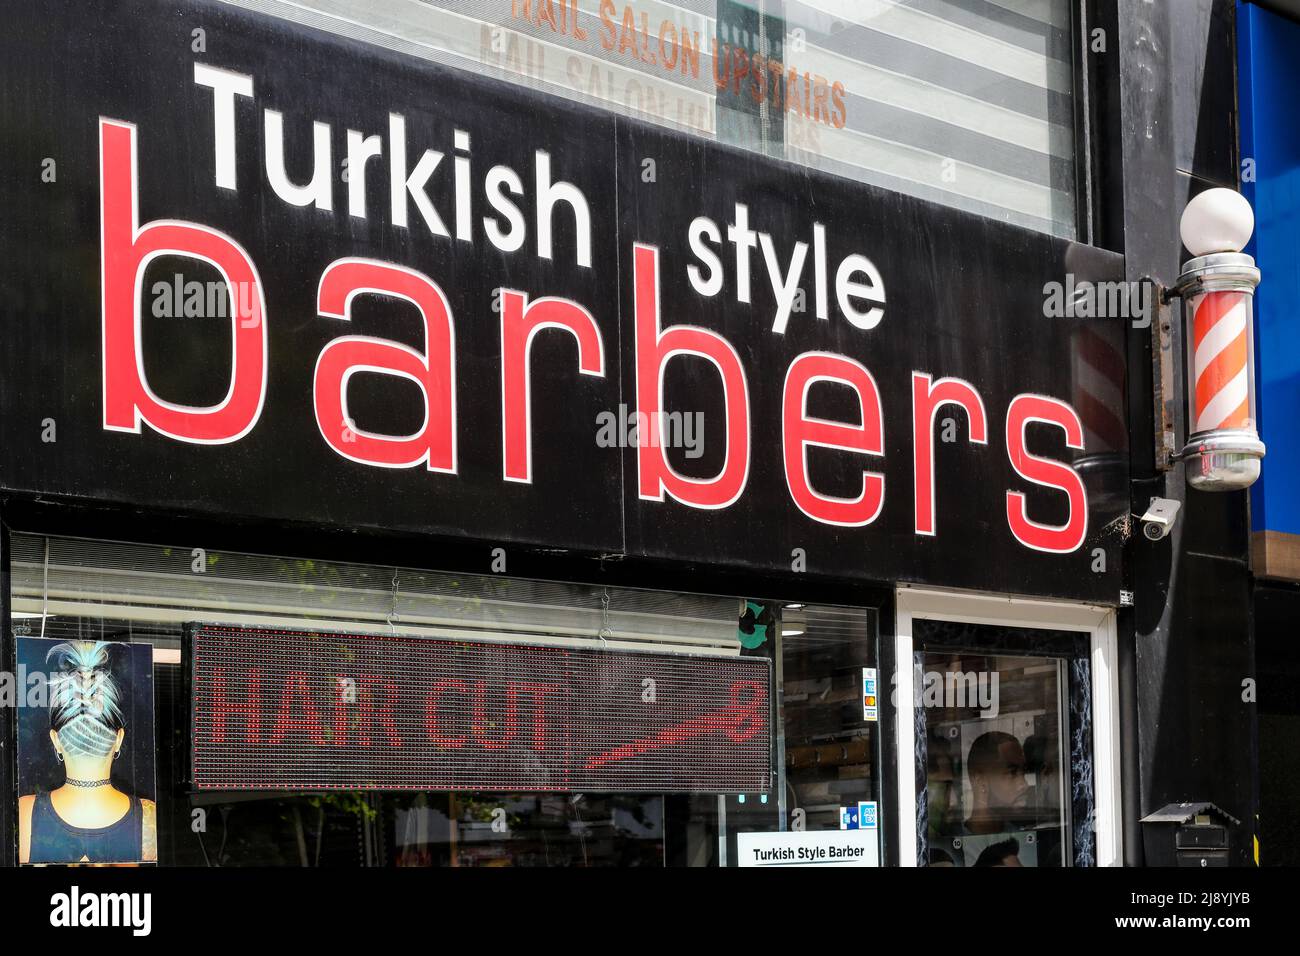 Shop sign for a Turkish style barbers and hairdresser, Sauchiehall Street, Glasgow, Scotland, UK Stock Photo